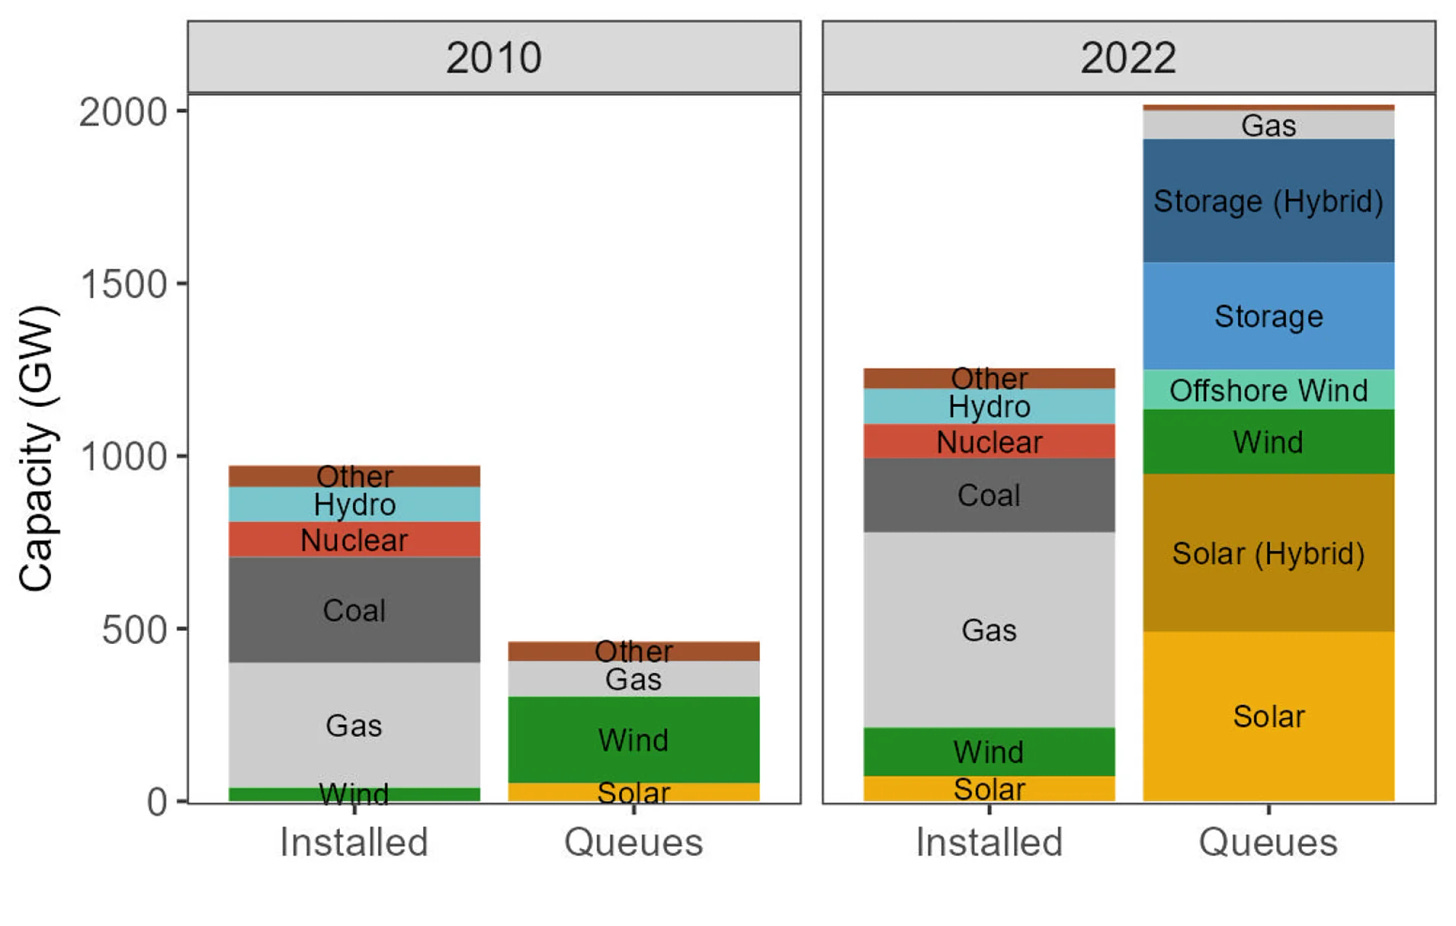 In 2022, the active energy capacity in interconnection queues in the U.S. is about 2,020 gigawatts and exceeds the installed capacity of entire U.S. power plant fleet, which is about 1,250 gigawatts, according to the report on interconnection queues out of Lawrence Berkeley National Laboratory published Thursday. Chart courtesy Joseph Rand at Lawrence Berkeley National Laboratory.